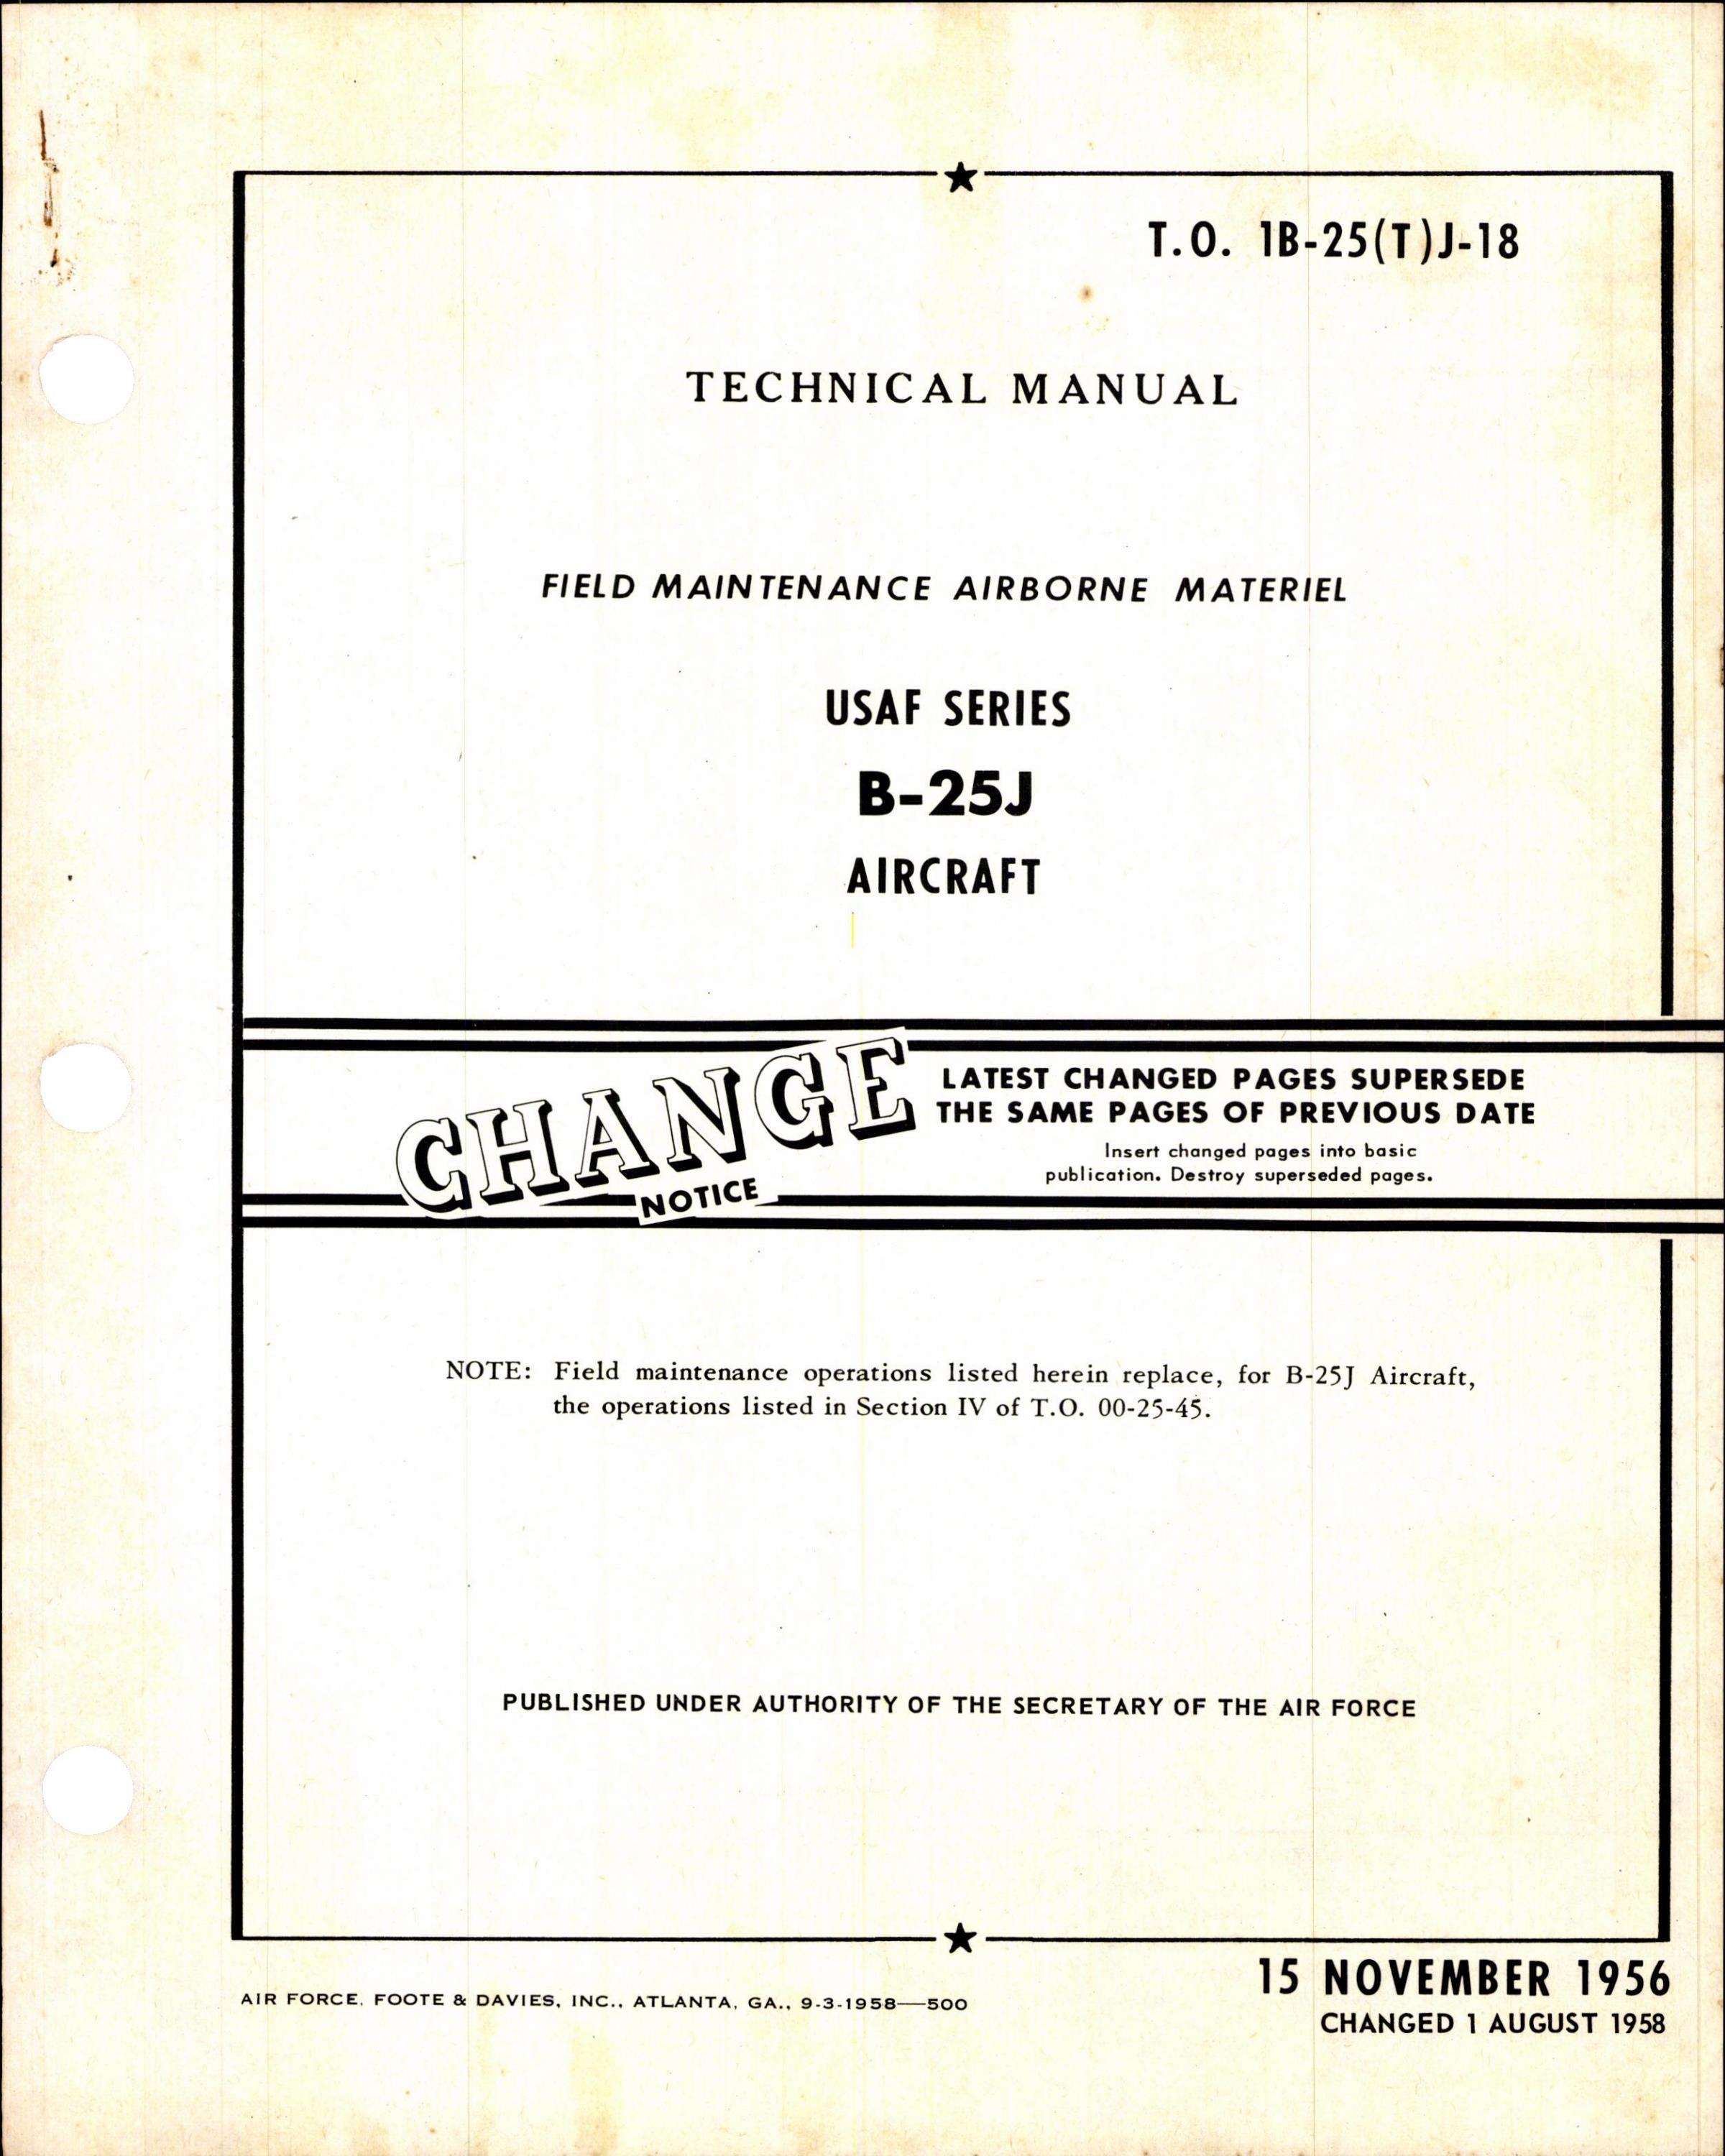 Sample page 1 from AirCorps Library document: Field Maintenance Airborne Material for USAF Series B-25J